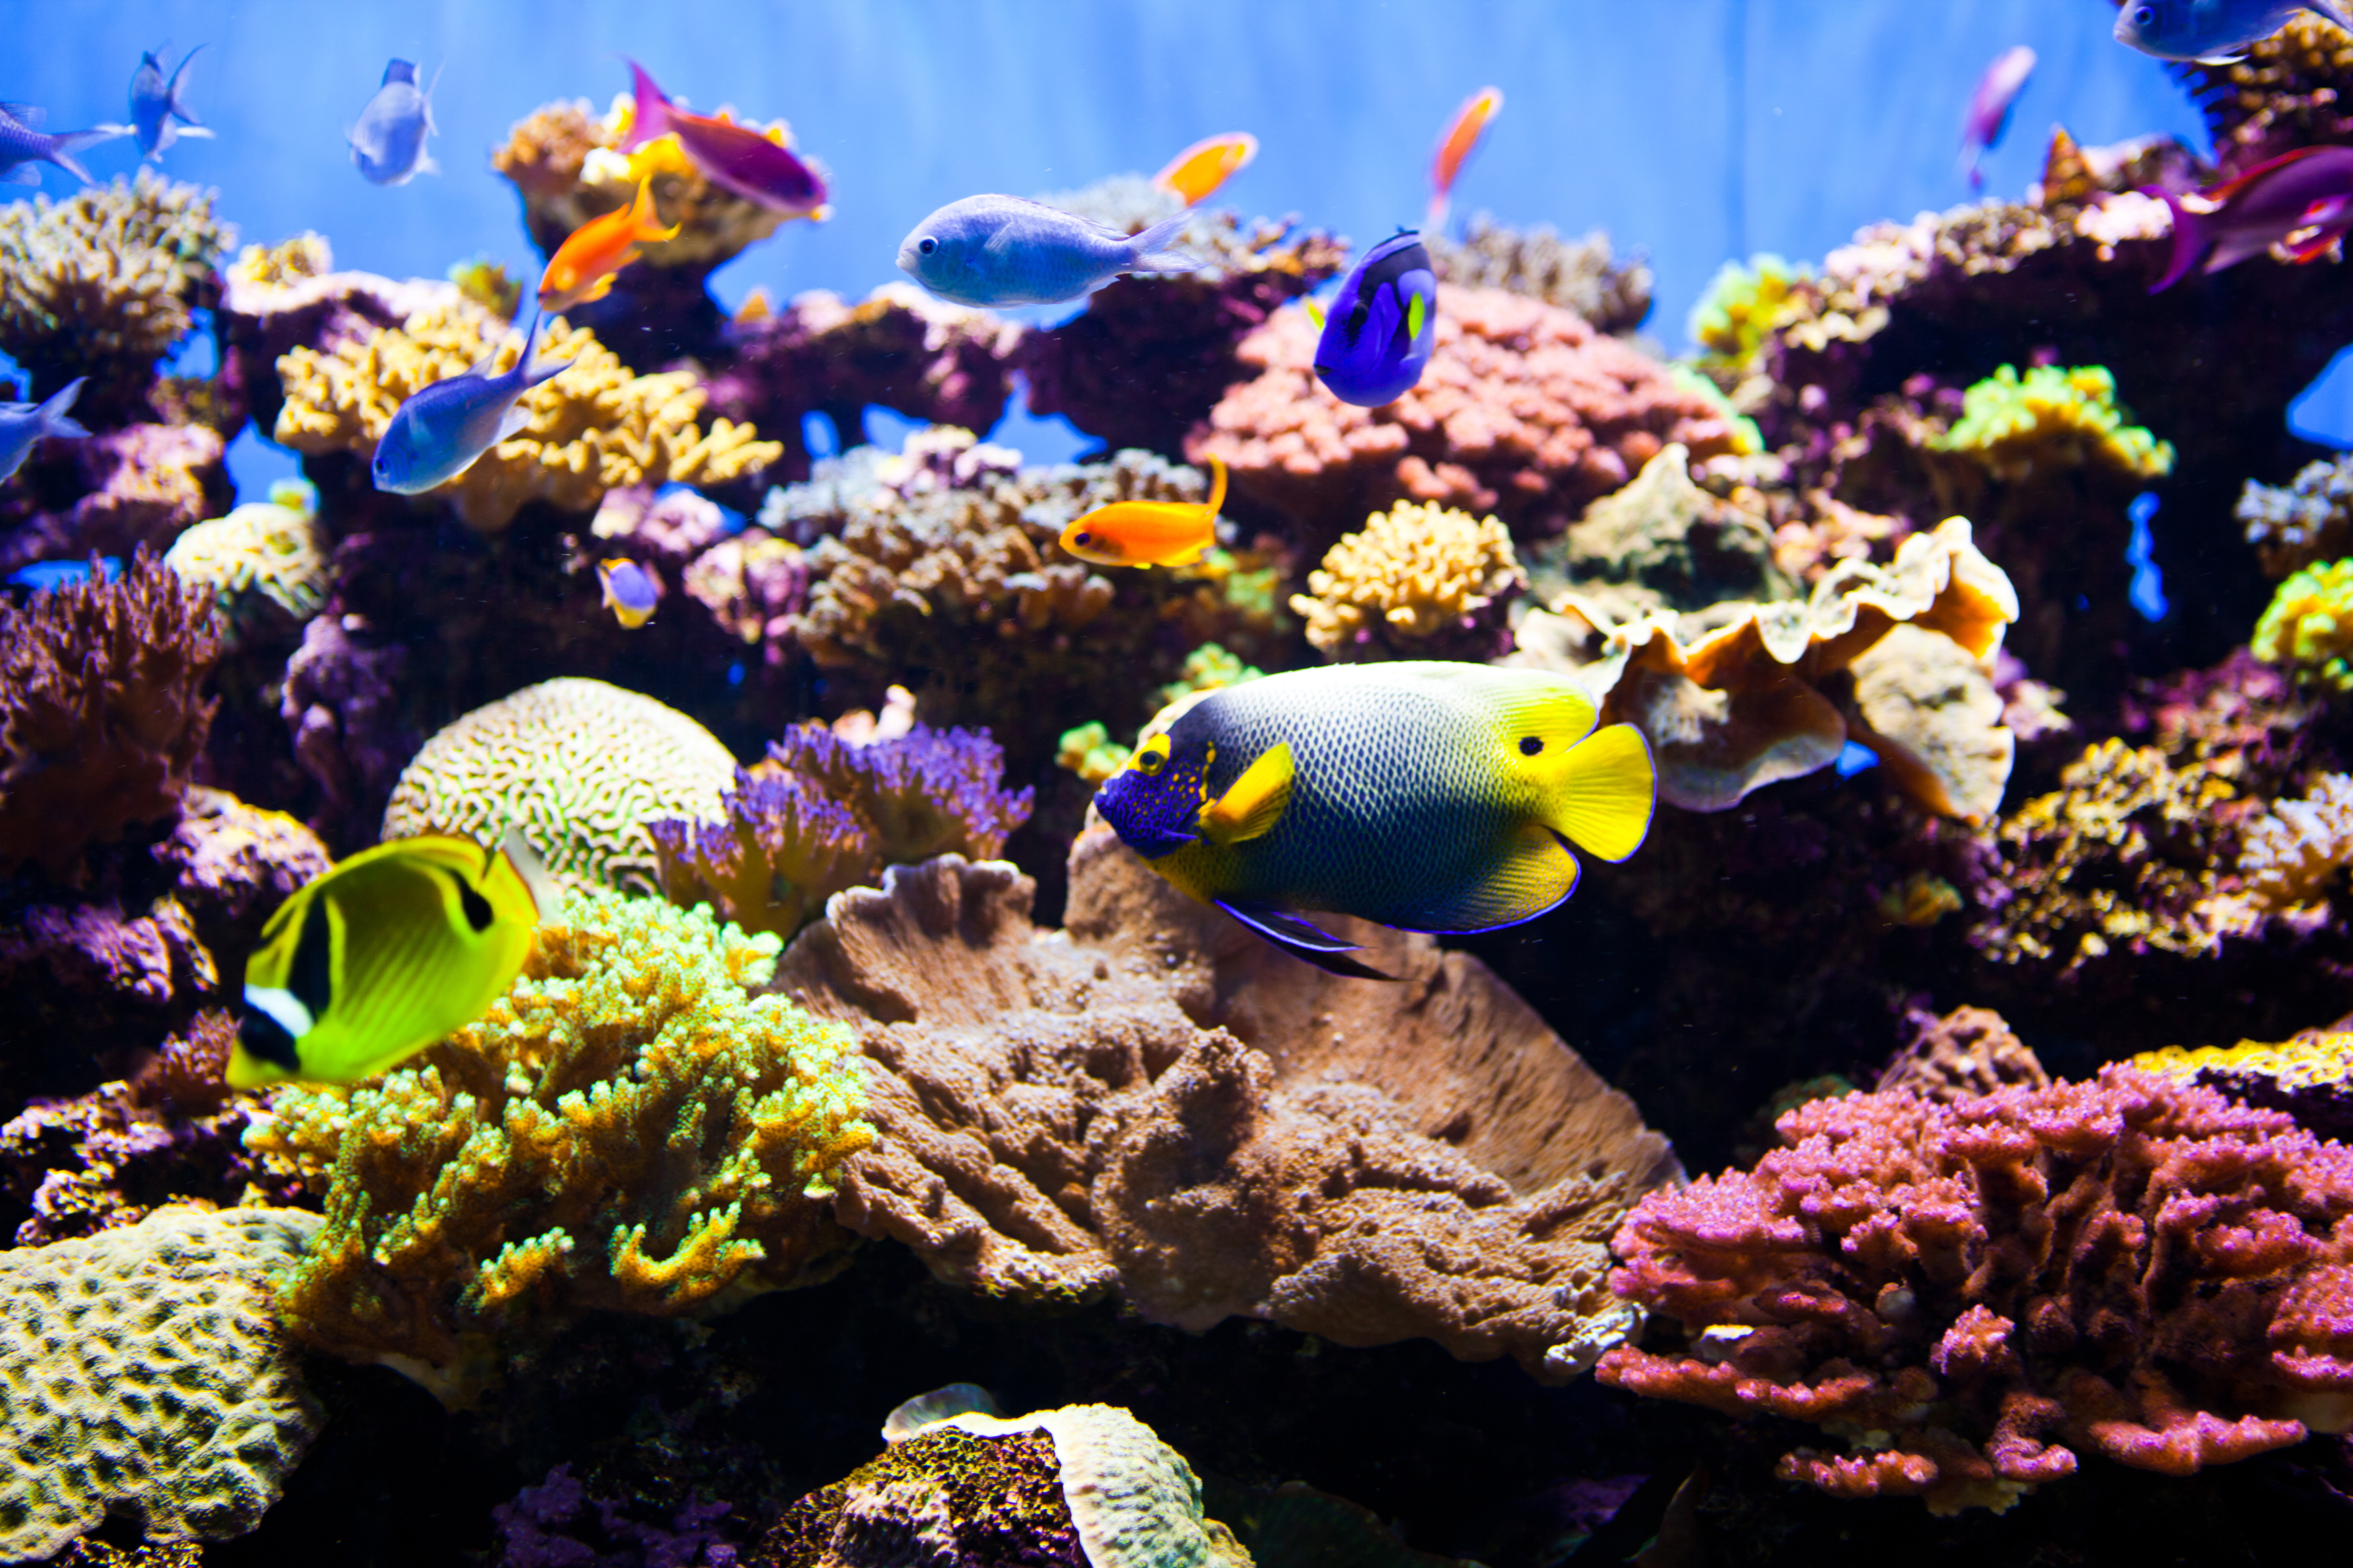 Abundance of tropical fish in an aquarium. Very colorful ocean fish with live coral.